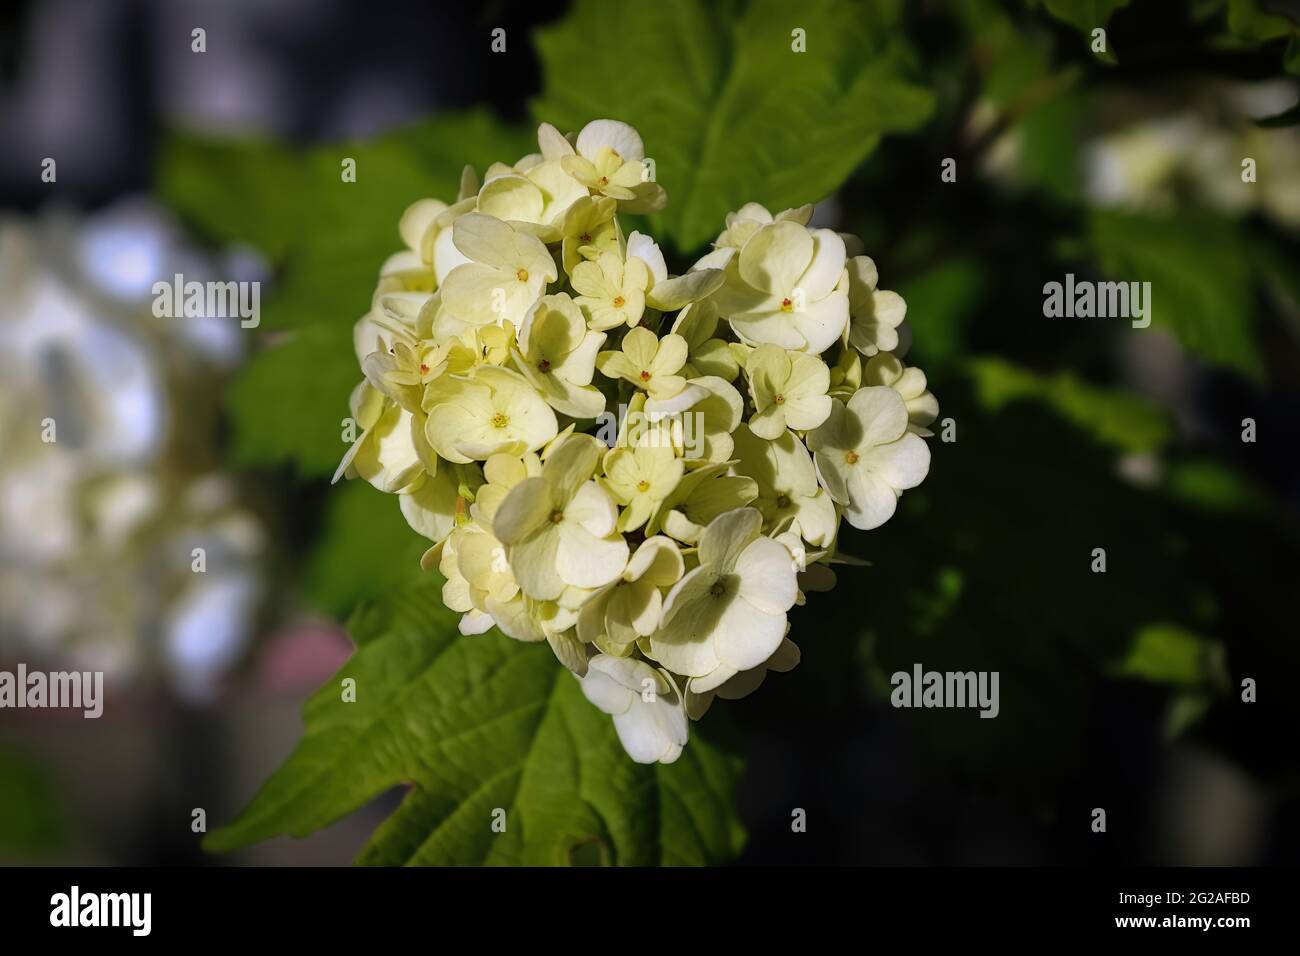 Closeup of flowers on a cranberry shrub in the shape of a heart Stock Photo